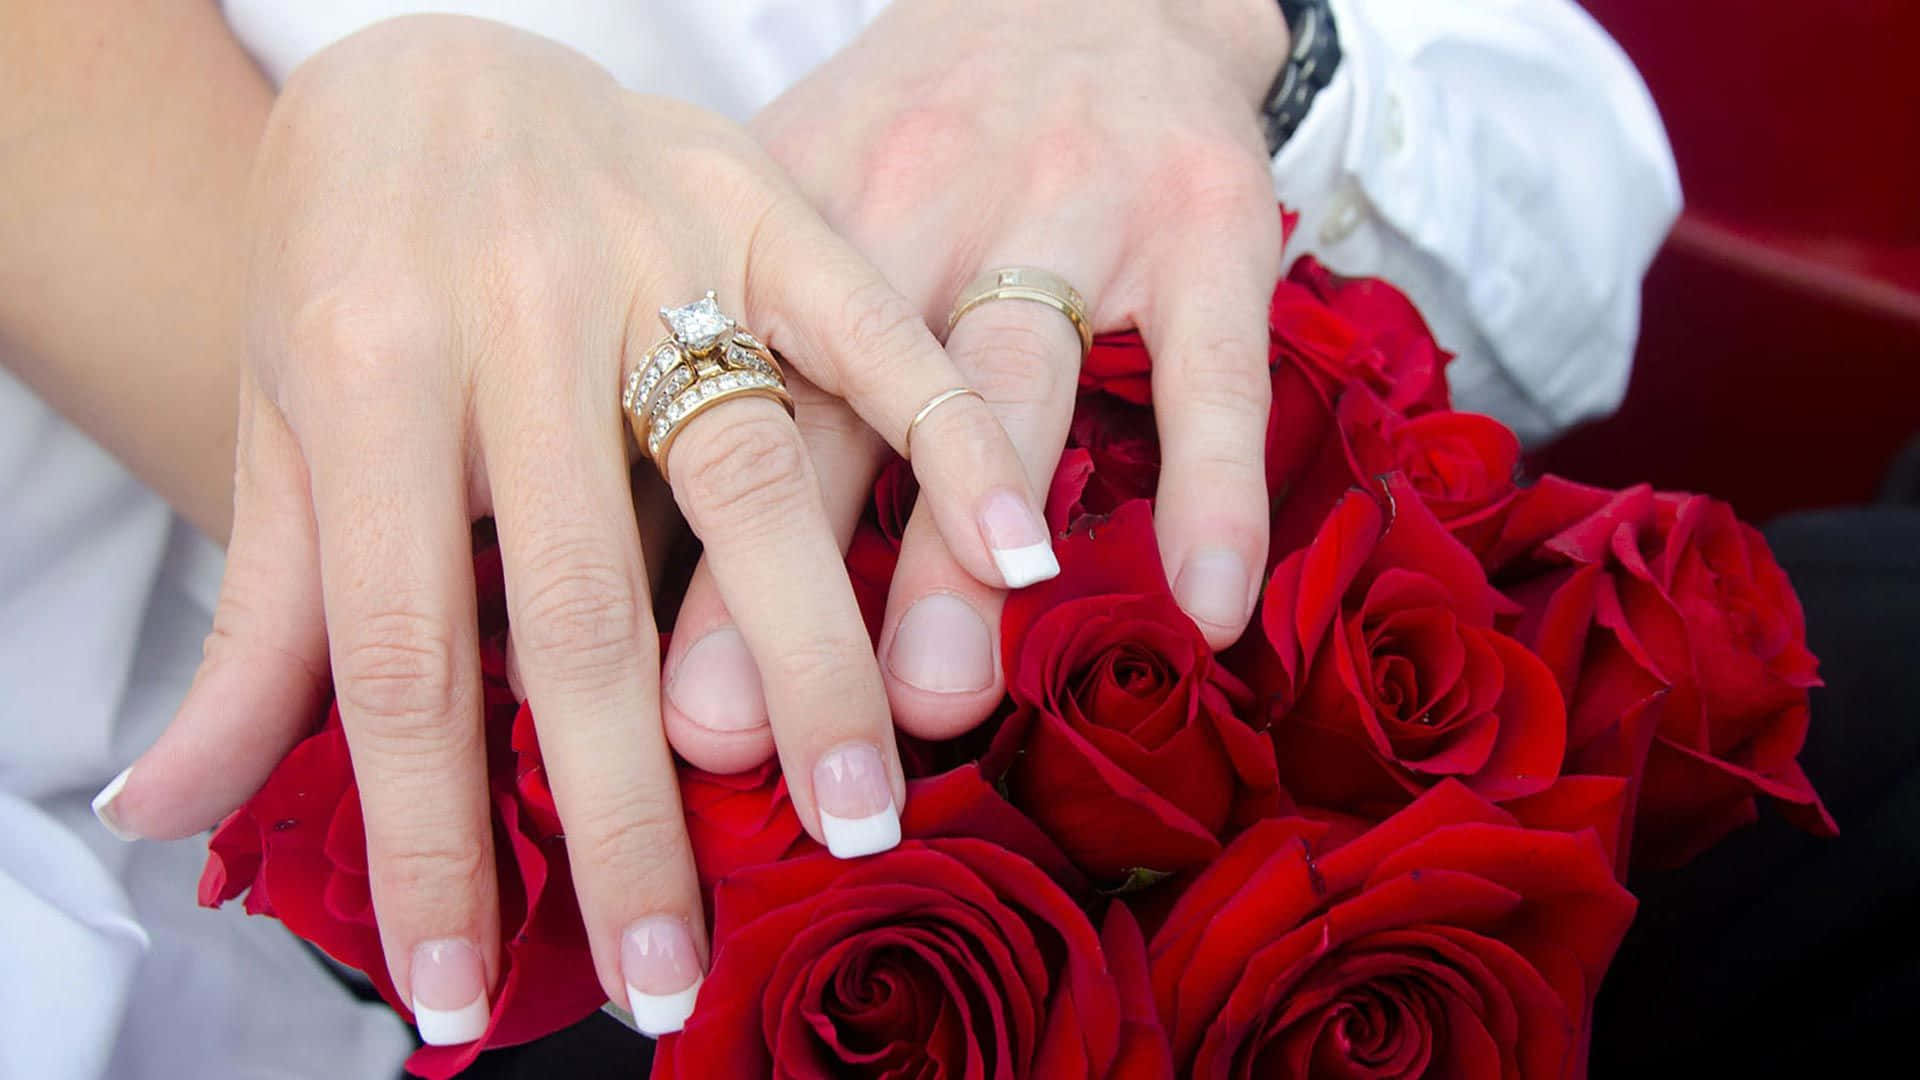 Download Couple Engagement Rings Red Rose Wallpaper 